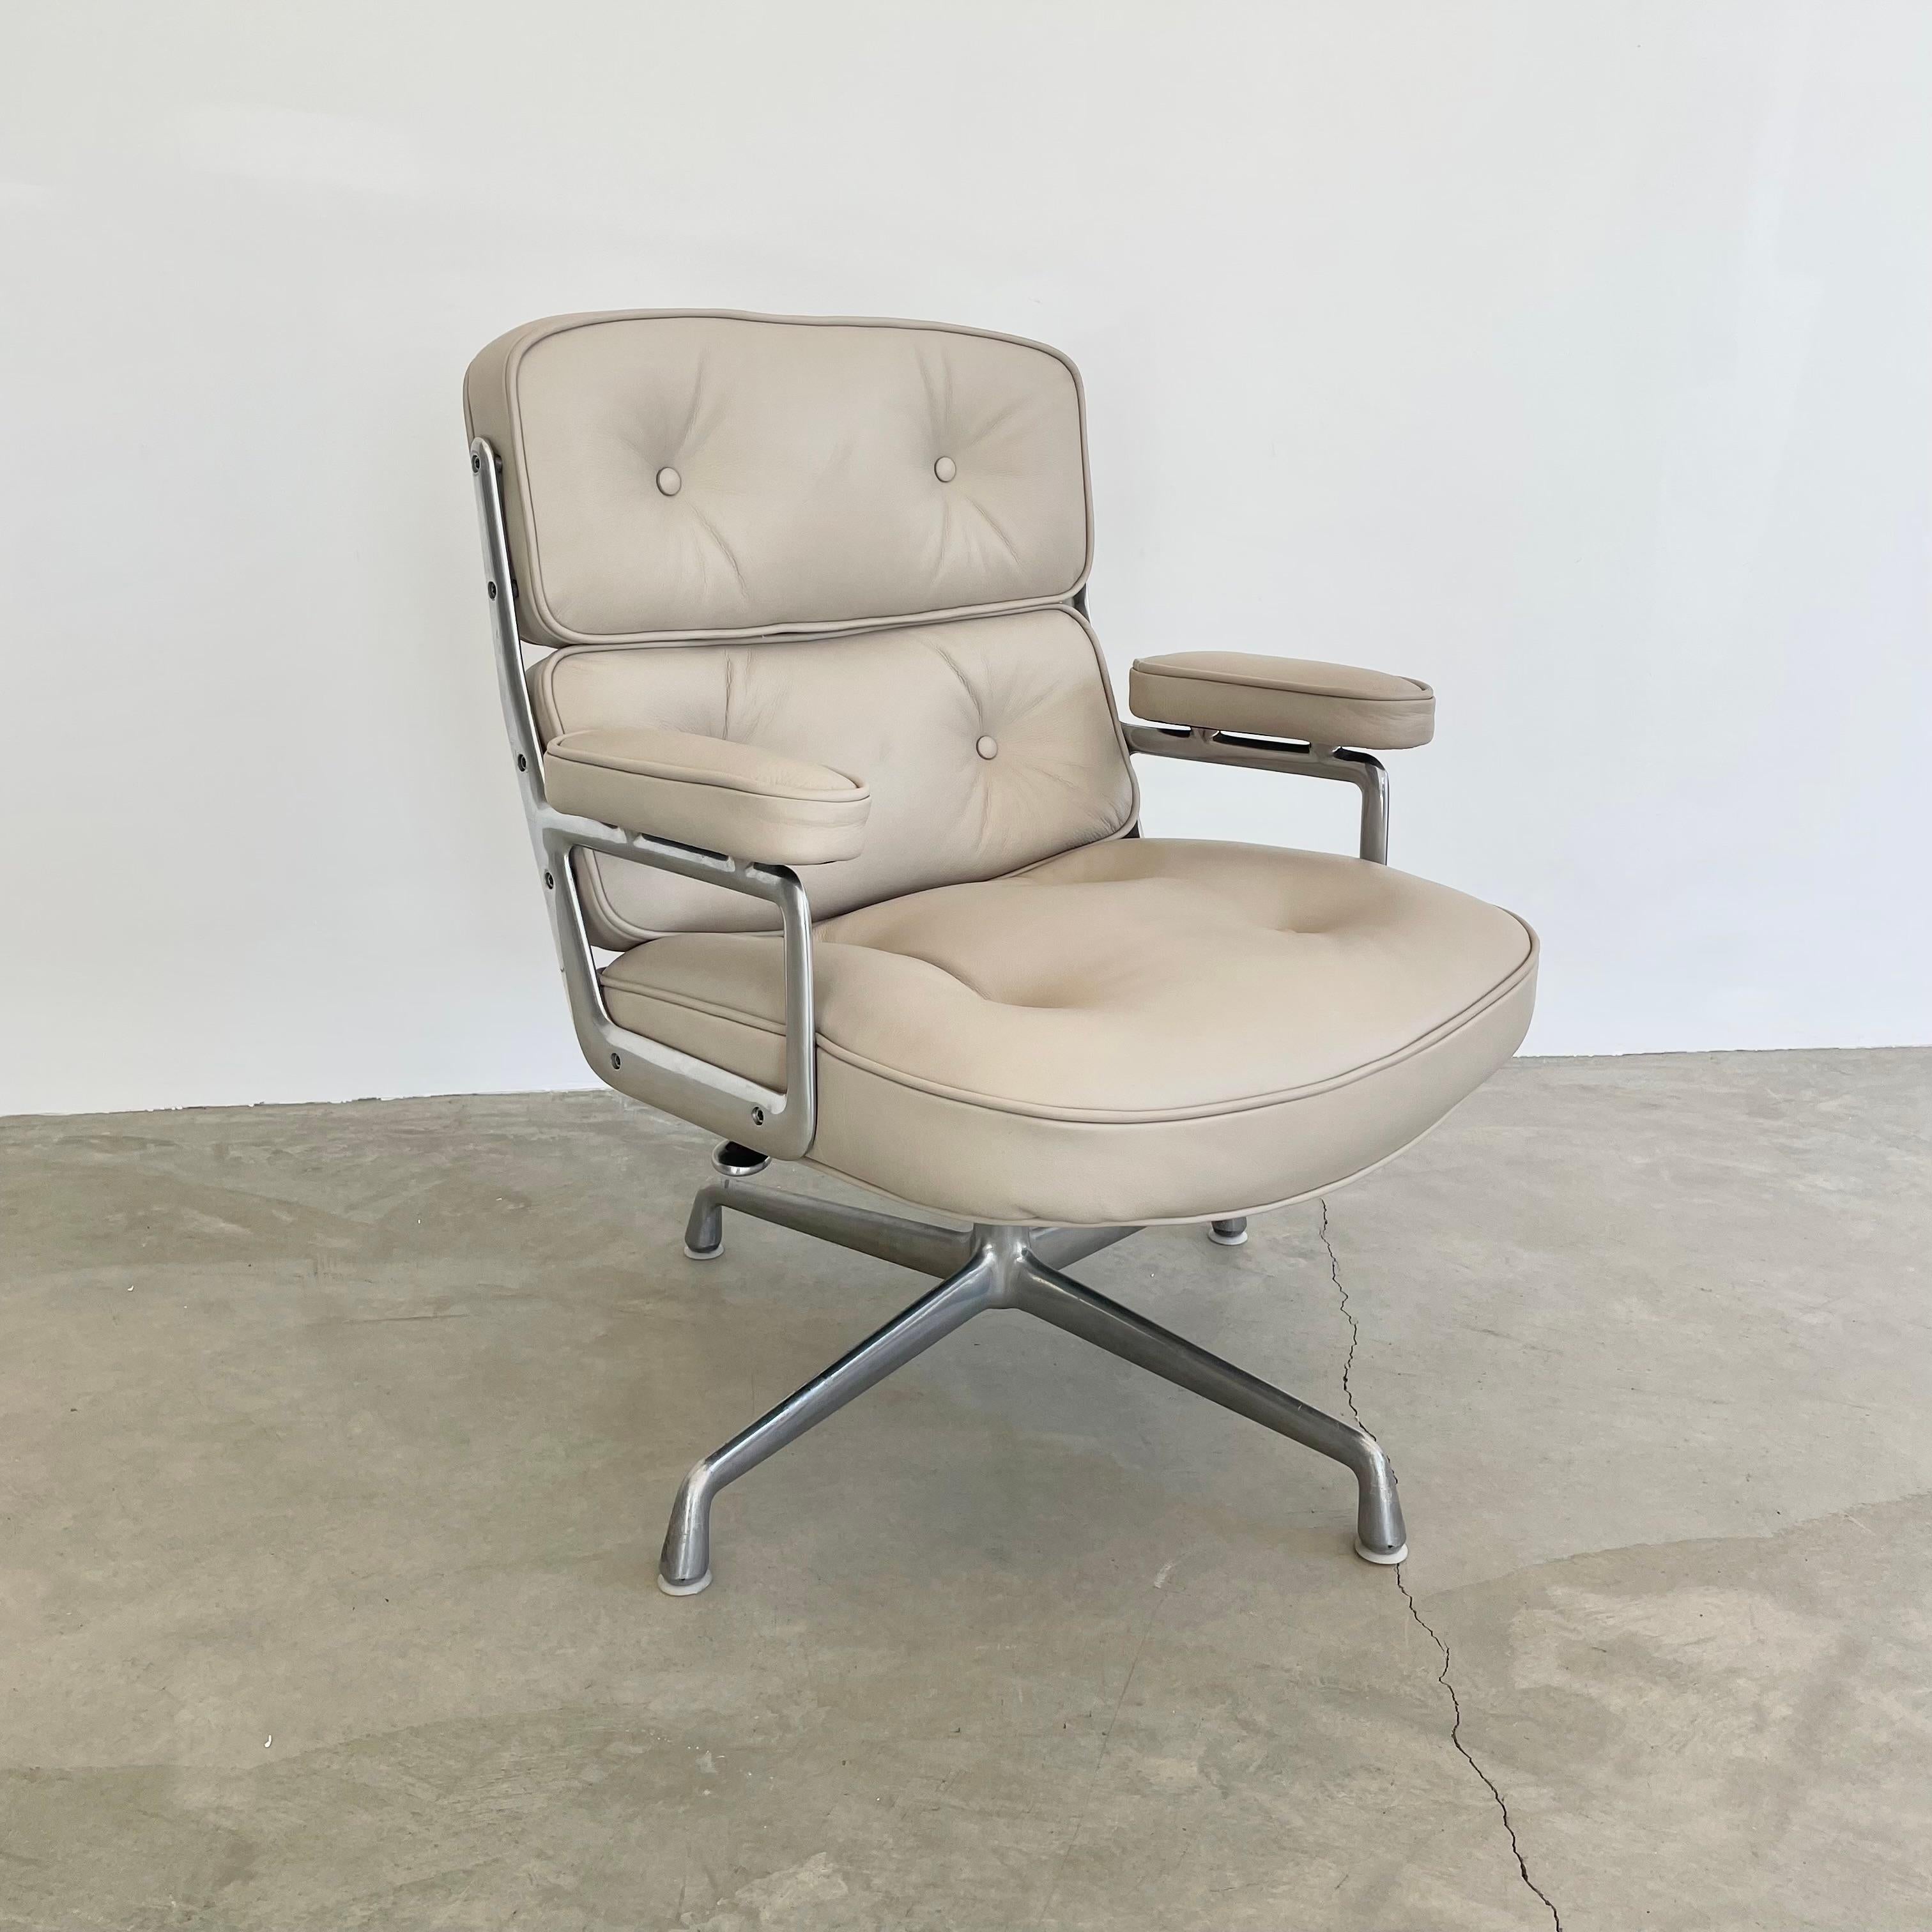 Classic Eames Time Life chair for Herman Miller in light grey leather with a polished aluminum frame and legs made in Los Angeles, CA. Originally designed in 1960 by Charles and Ray Eames for use in the lobby of the Time Life building in New York.